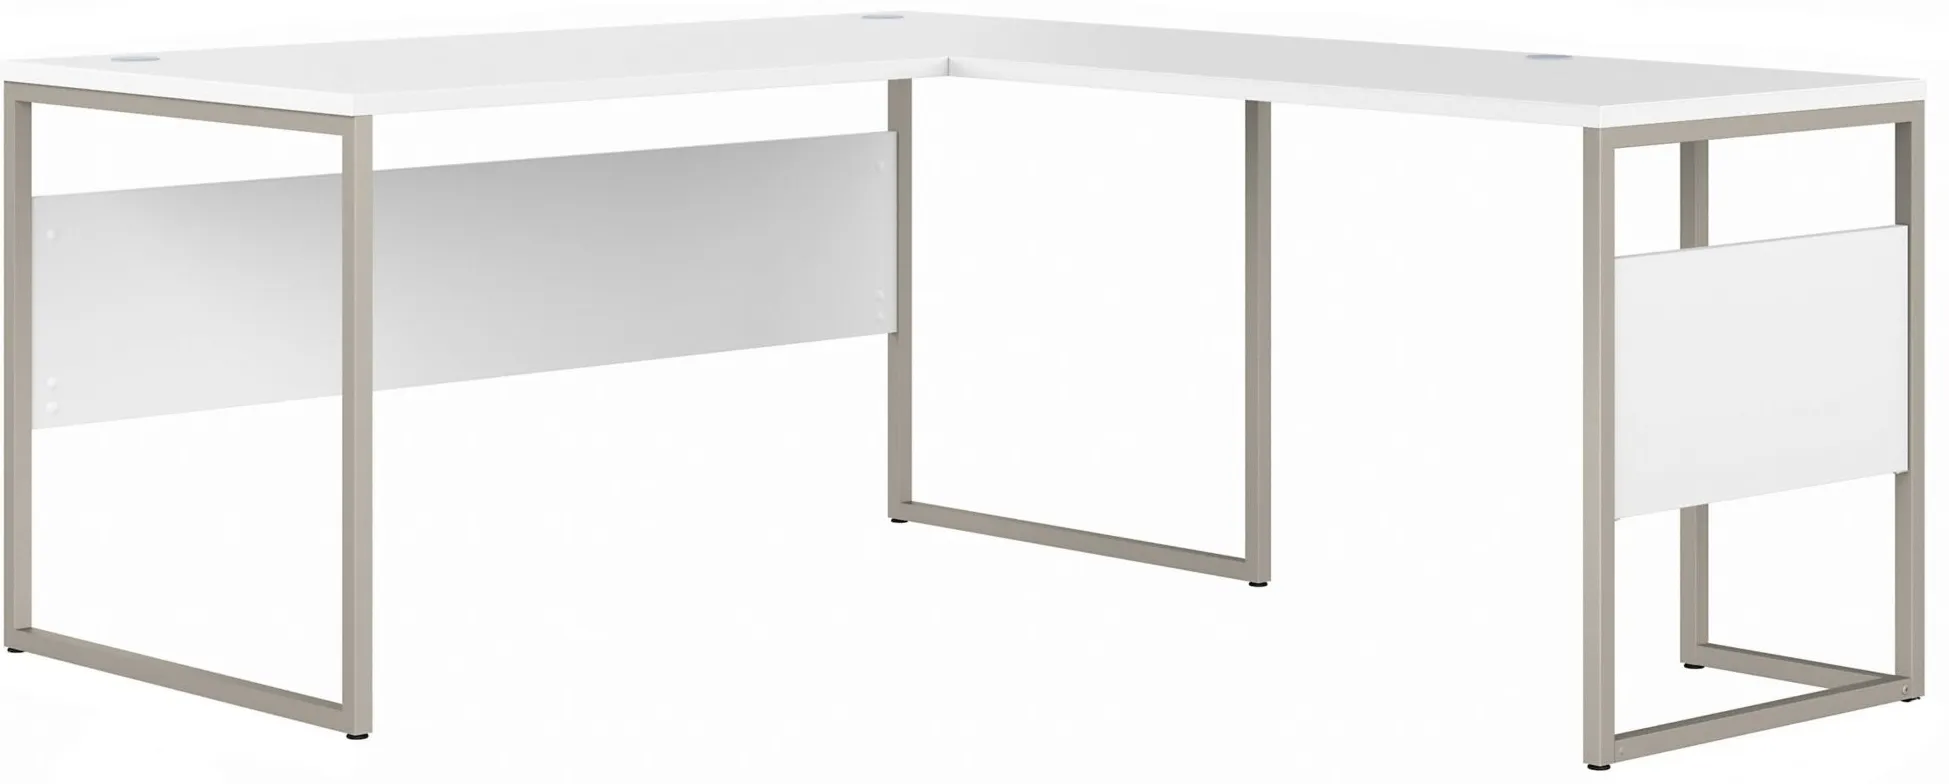 Steinbeck L-Shaped Writing Desk in White by Bush Industries